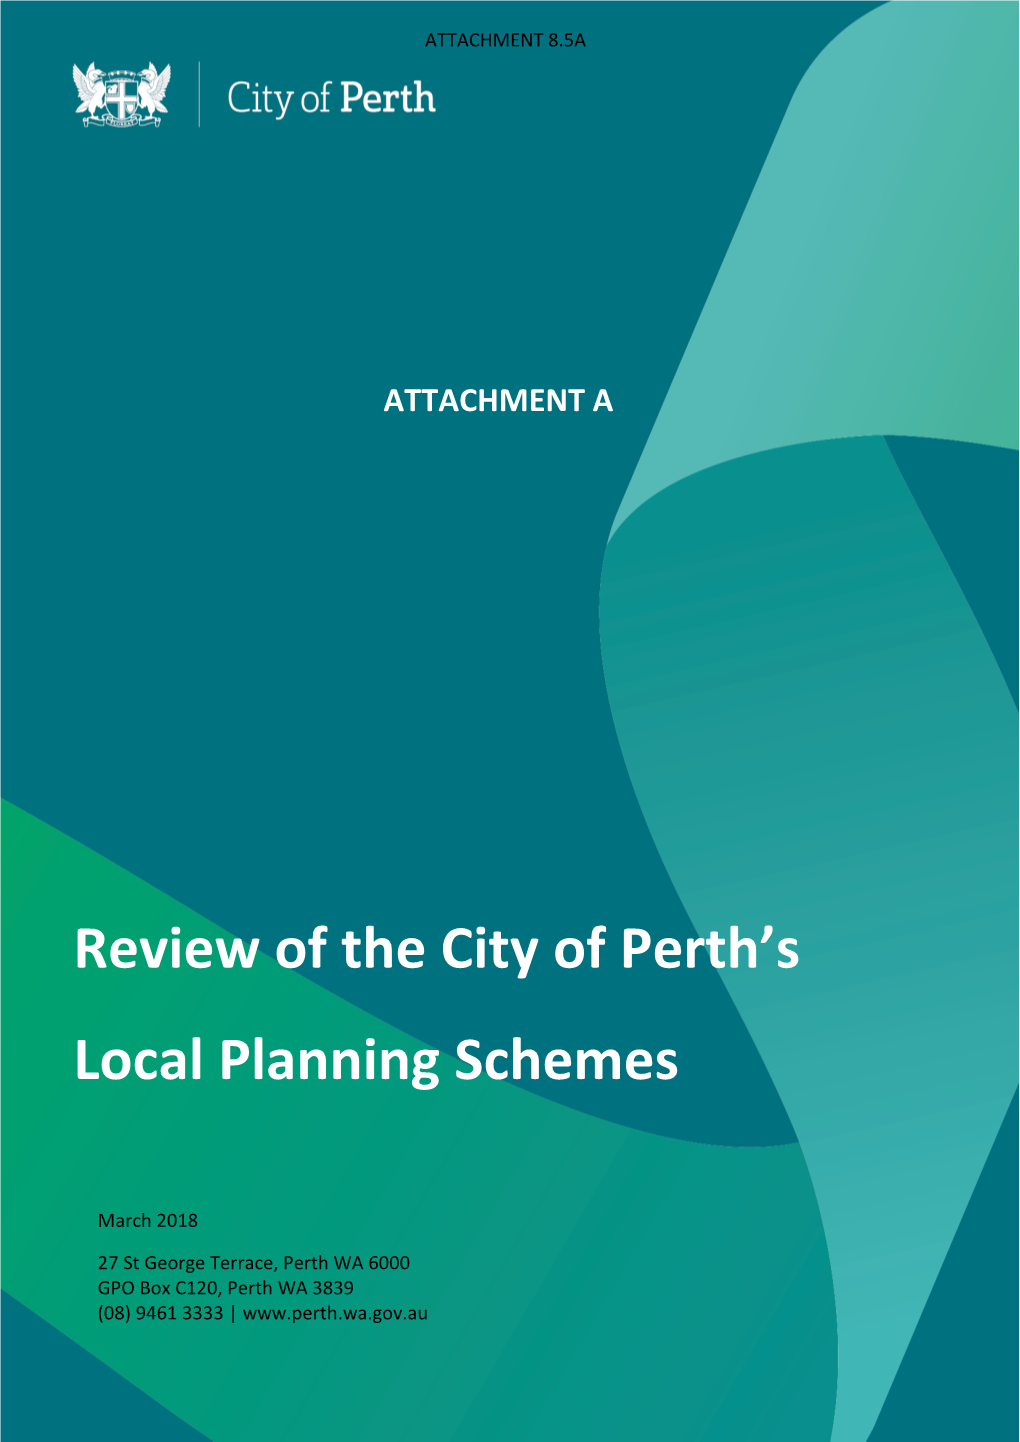 Review of the City of Perth's Local Planning Schemes